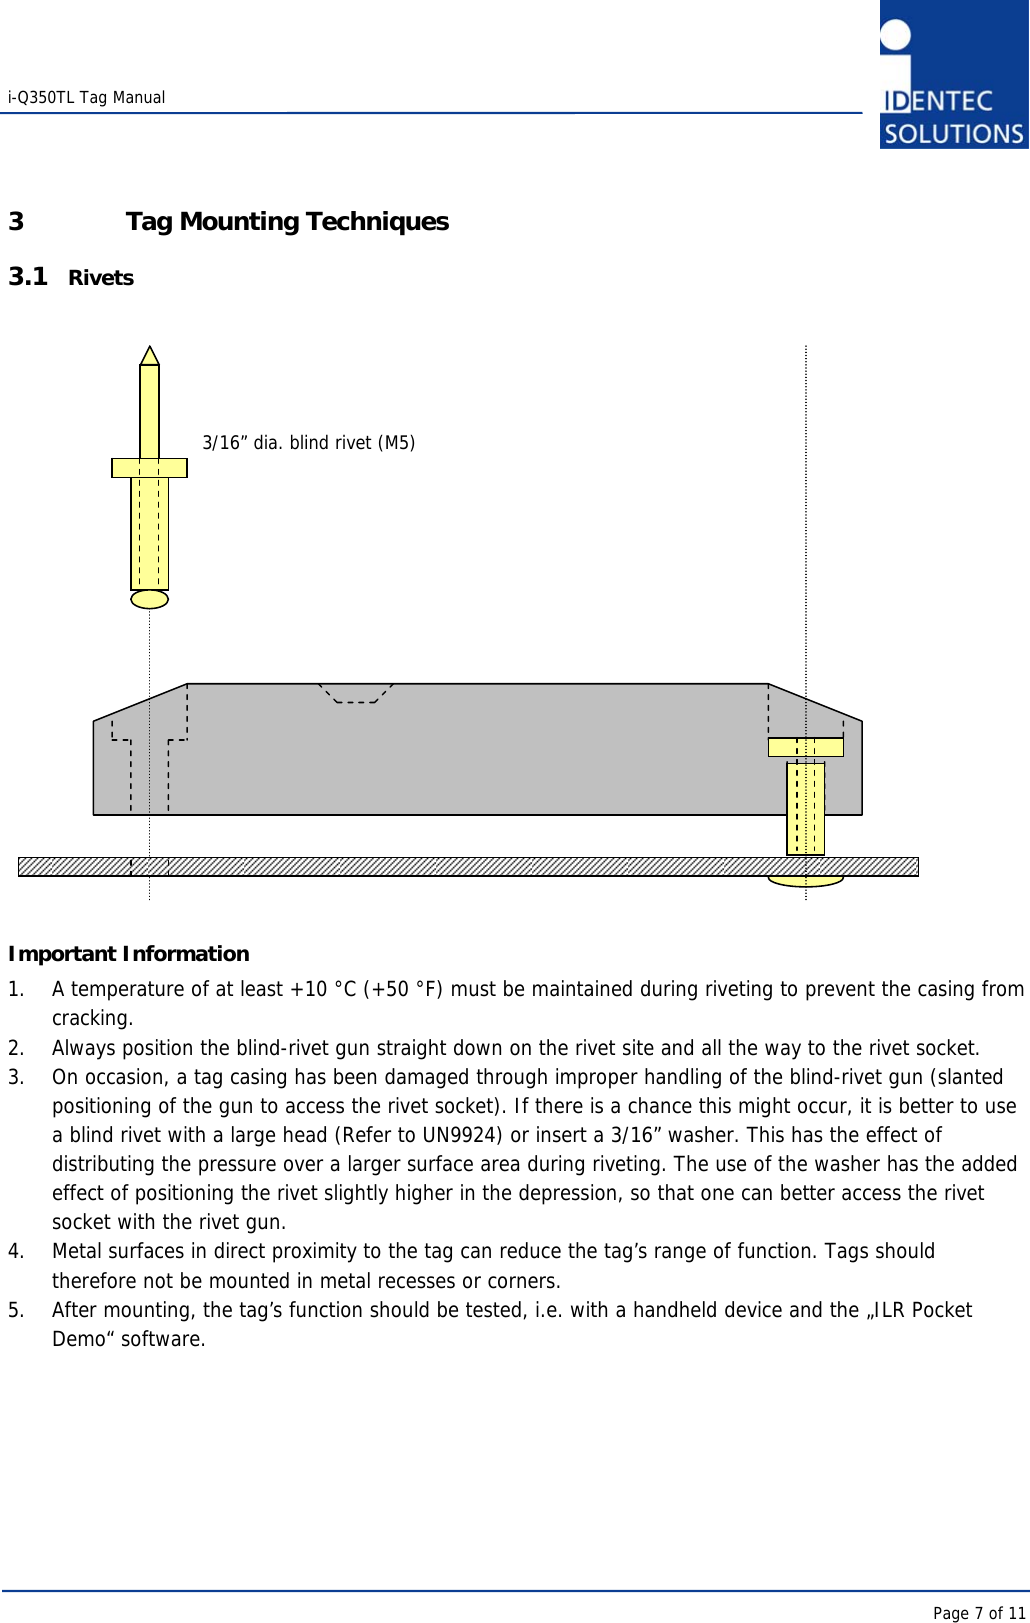   i-Q350TL Tag Manual      Page 7 of 11 3 Tag Mounting Techniques 3.1 Rivets                      Important Information 1.  A temperature of at least +10 °C (+50 °F) must be maintained during riveting to prevent the casing from cracking.  2.  Always position the blind-rivet gun straight down on the rivet site and all the way to the rivet socket.  3.  On occasion, a tag casing has been damaged through improper handling of the blind-rivet gun (slanted positioning of the gun to access the rivet socket). If there is a chance this might occur, it is better to use a blind rivet with a large head (Refer to UN9924) or insert a 3/16” washer. This has the effect of distributing the pressure over a larger surface area during riveting. The use of the washer has the added effect of positioning the rivet slightly higher in the depression, so that one can better access the rivet socket with the rivet gun.  4.  Metal surfaces in direct proximity to the tag can reduce the tag’s range of function. Tags should therefore not be mounted in metal recesses or corners.  5.  After mounting, the tag’s function should be tested, i.e. with a handheld device and the „ILR Pocket Demo“ software.       3/16” dia. blind rivet (M5) 